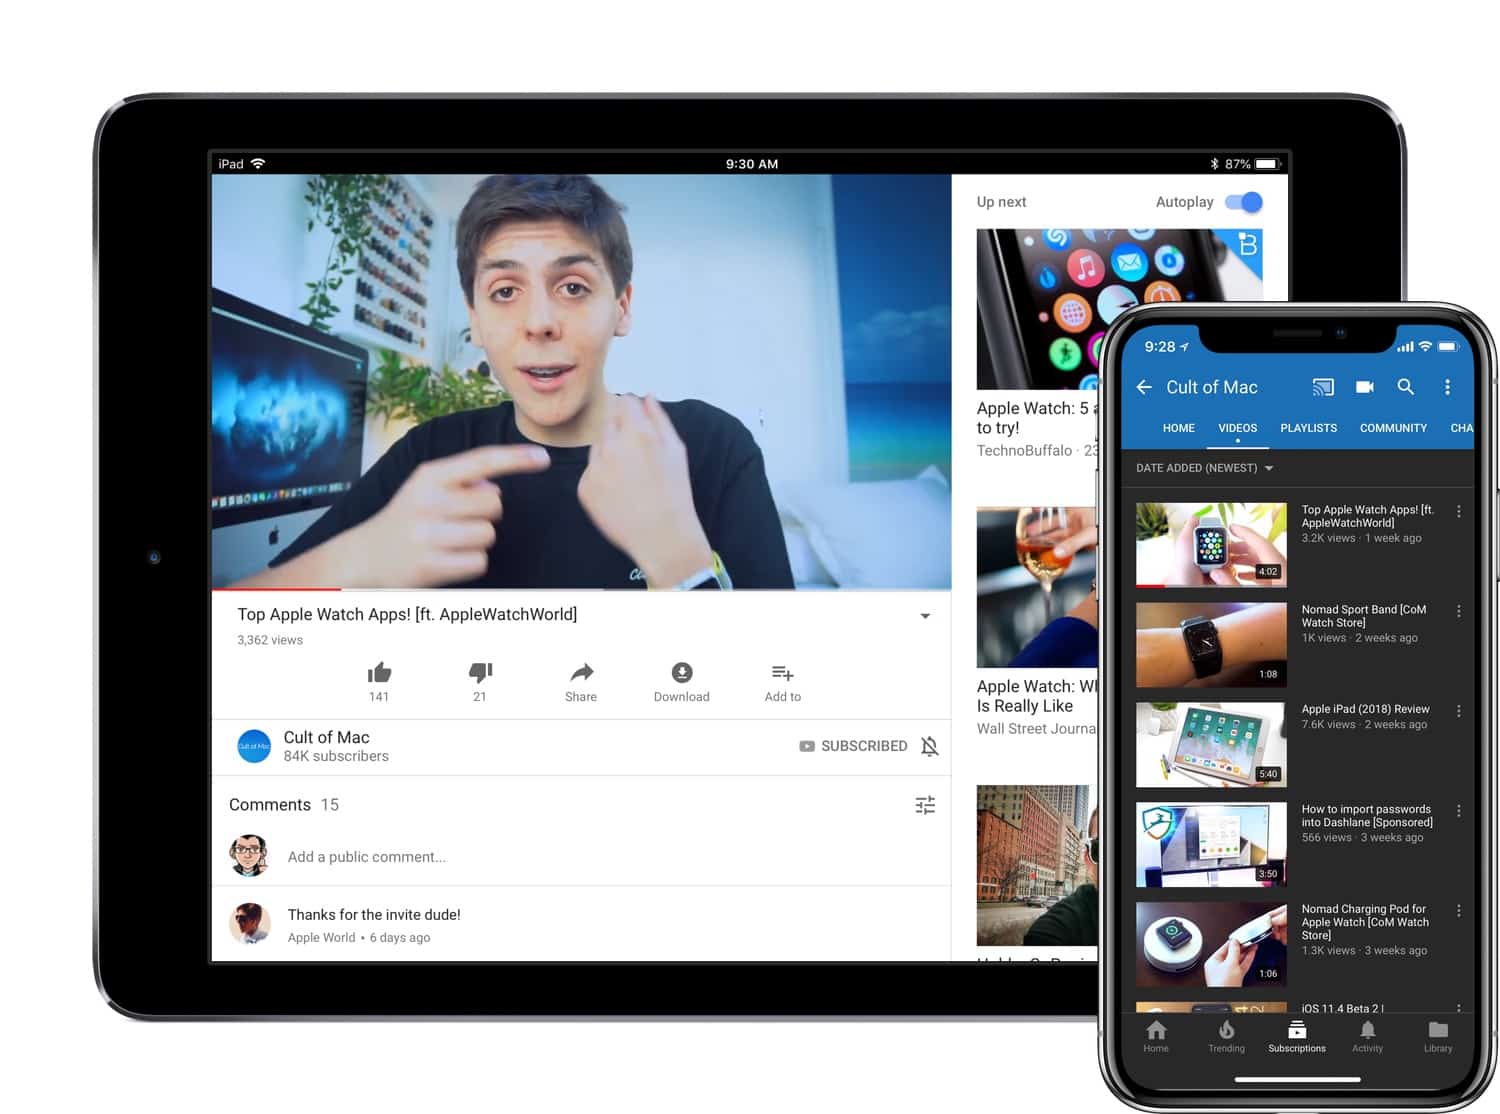 The YouTube app gives you the full YouTube experience on iPhone and iPad